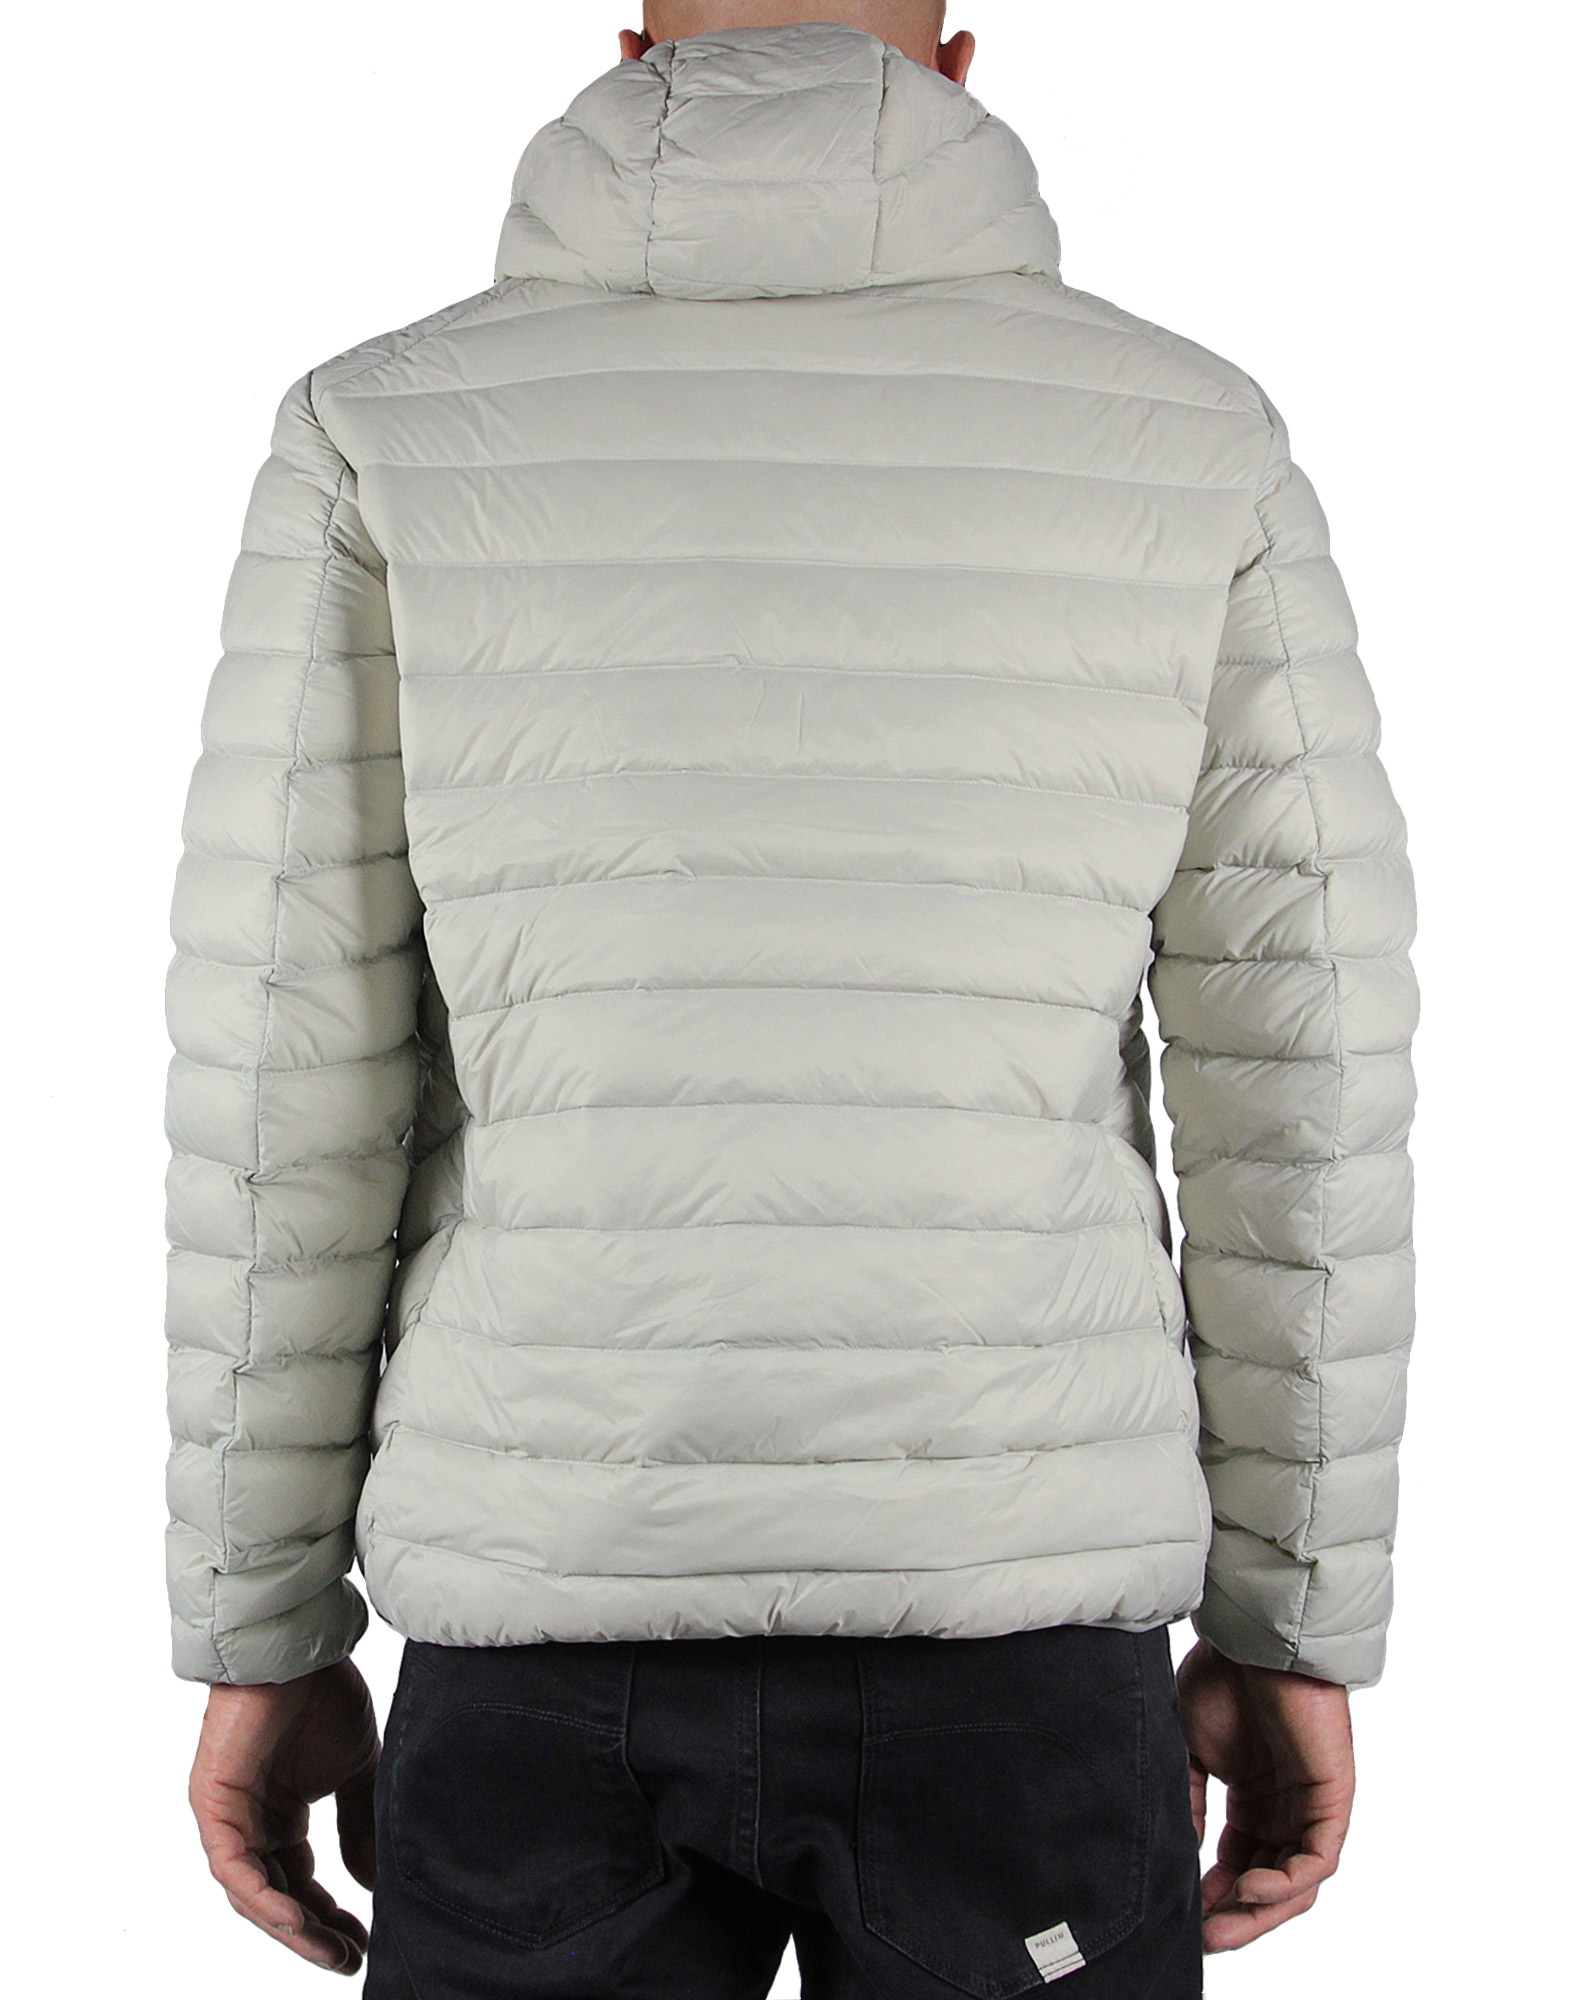 Men's feather jacket with hood SOCAL